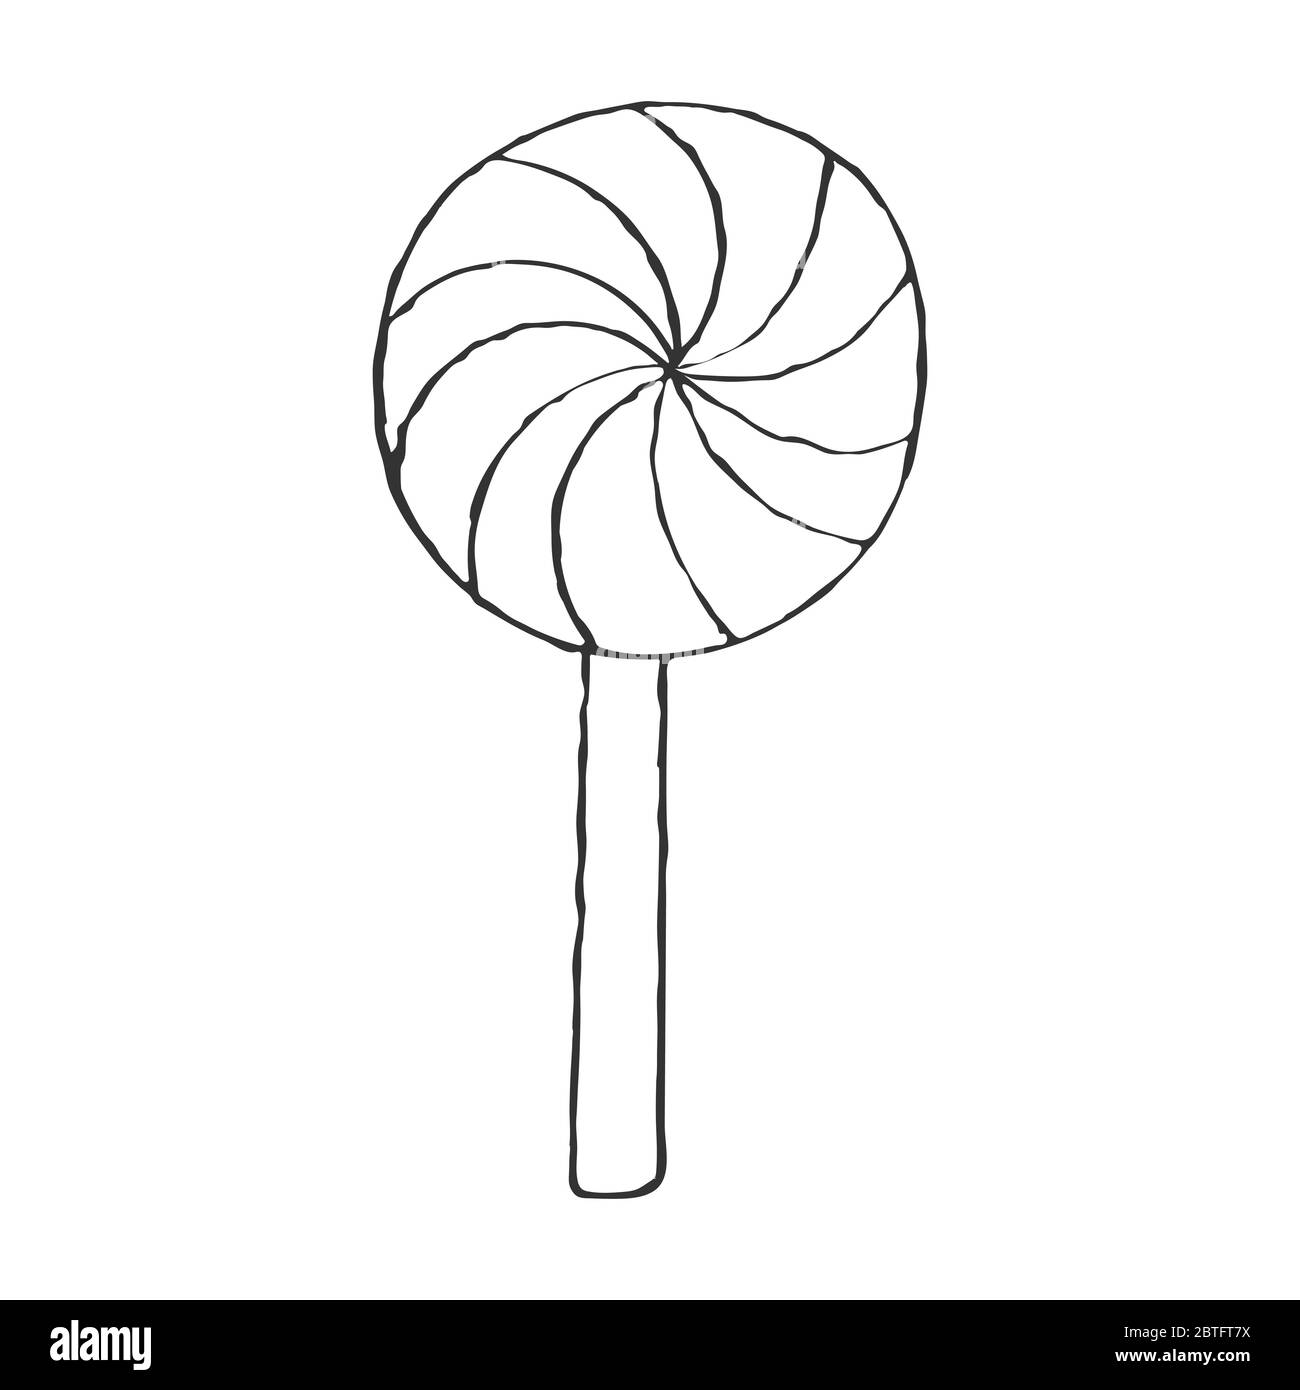 Candy Lollipop. Vector illustration in Doodle style, isolated on a white background, for coloring books and scrapbooking, theme design Stock Vector